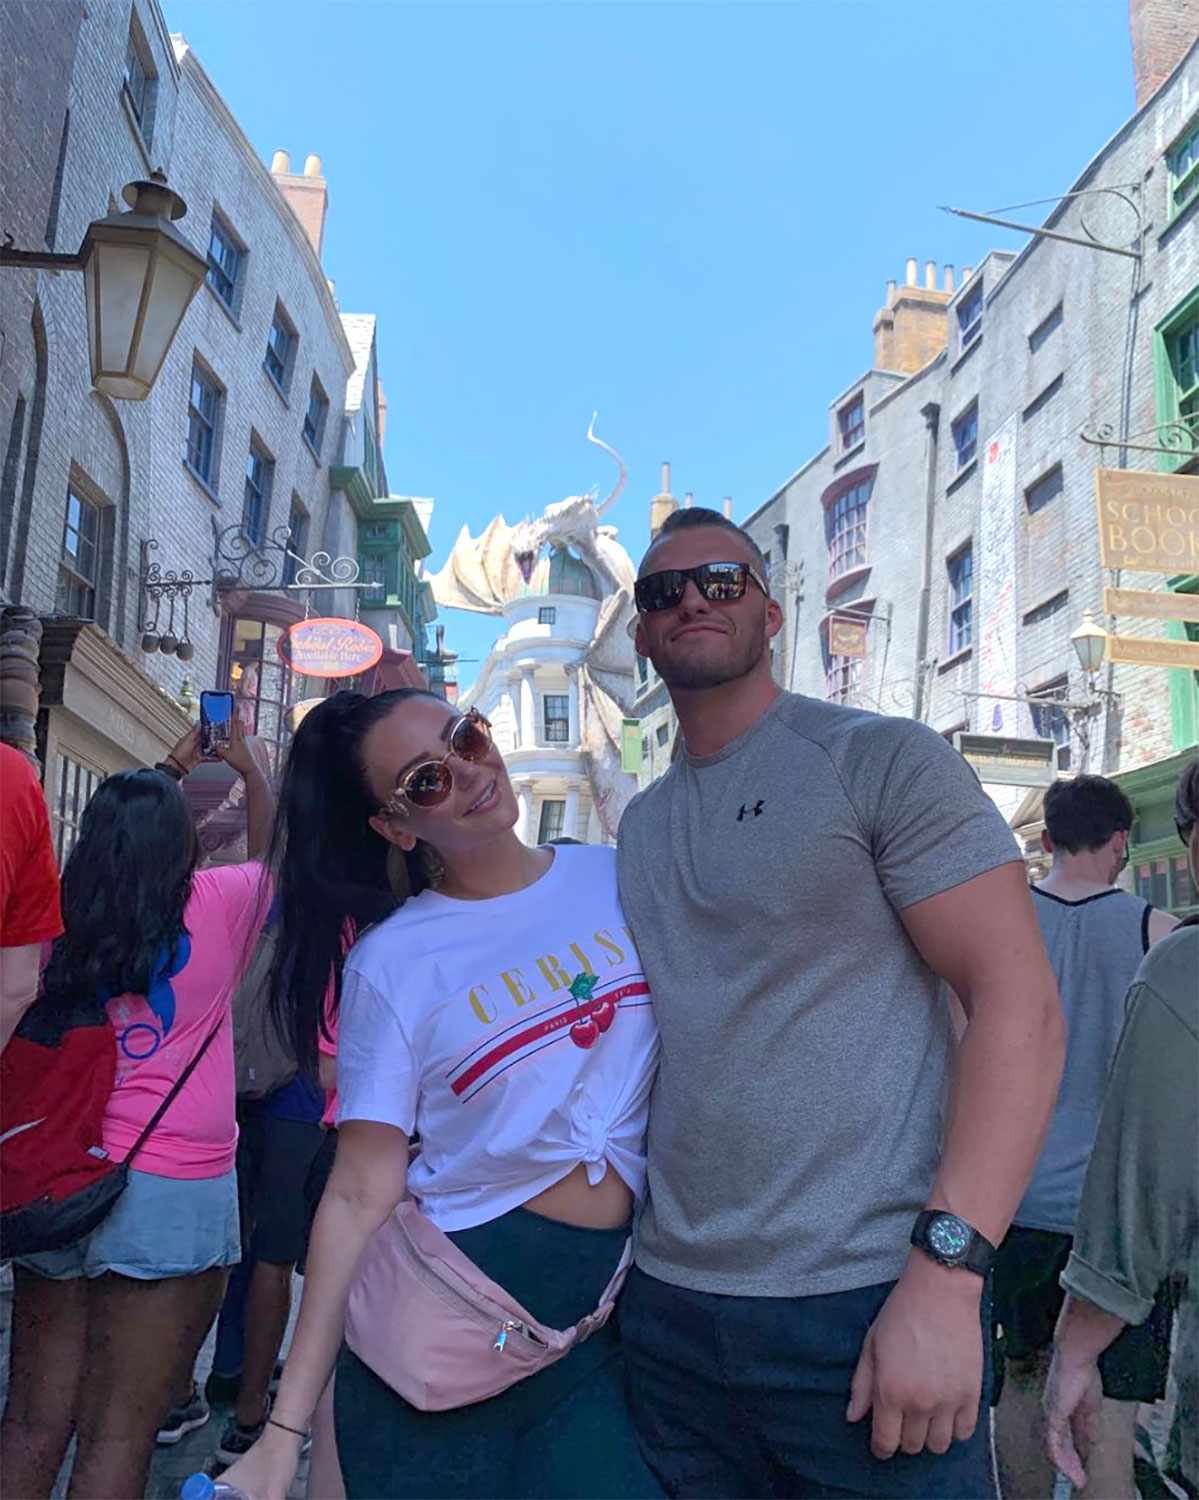 Jwoww at the Wizarding World of Harry Potter